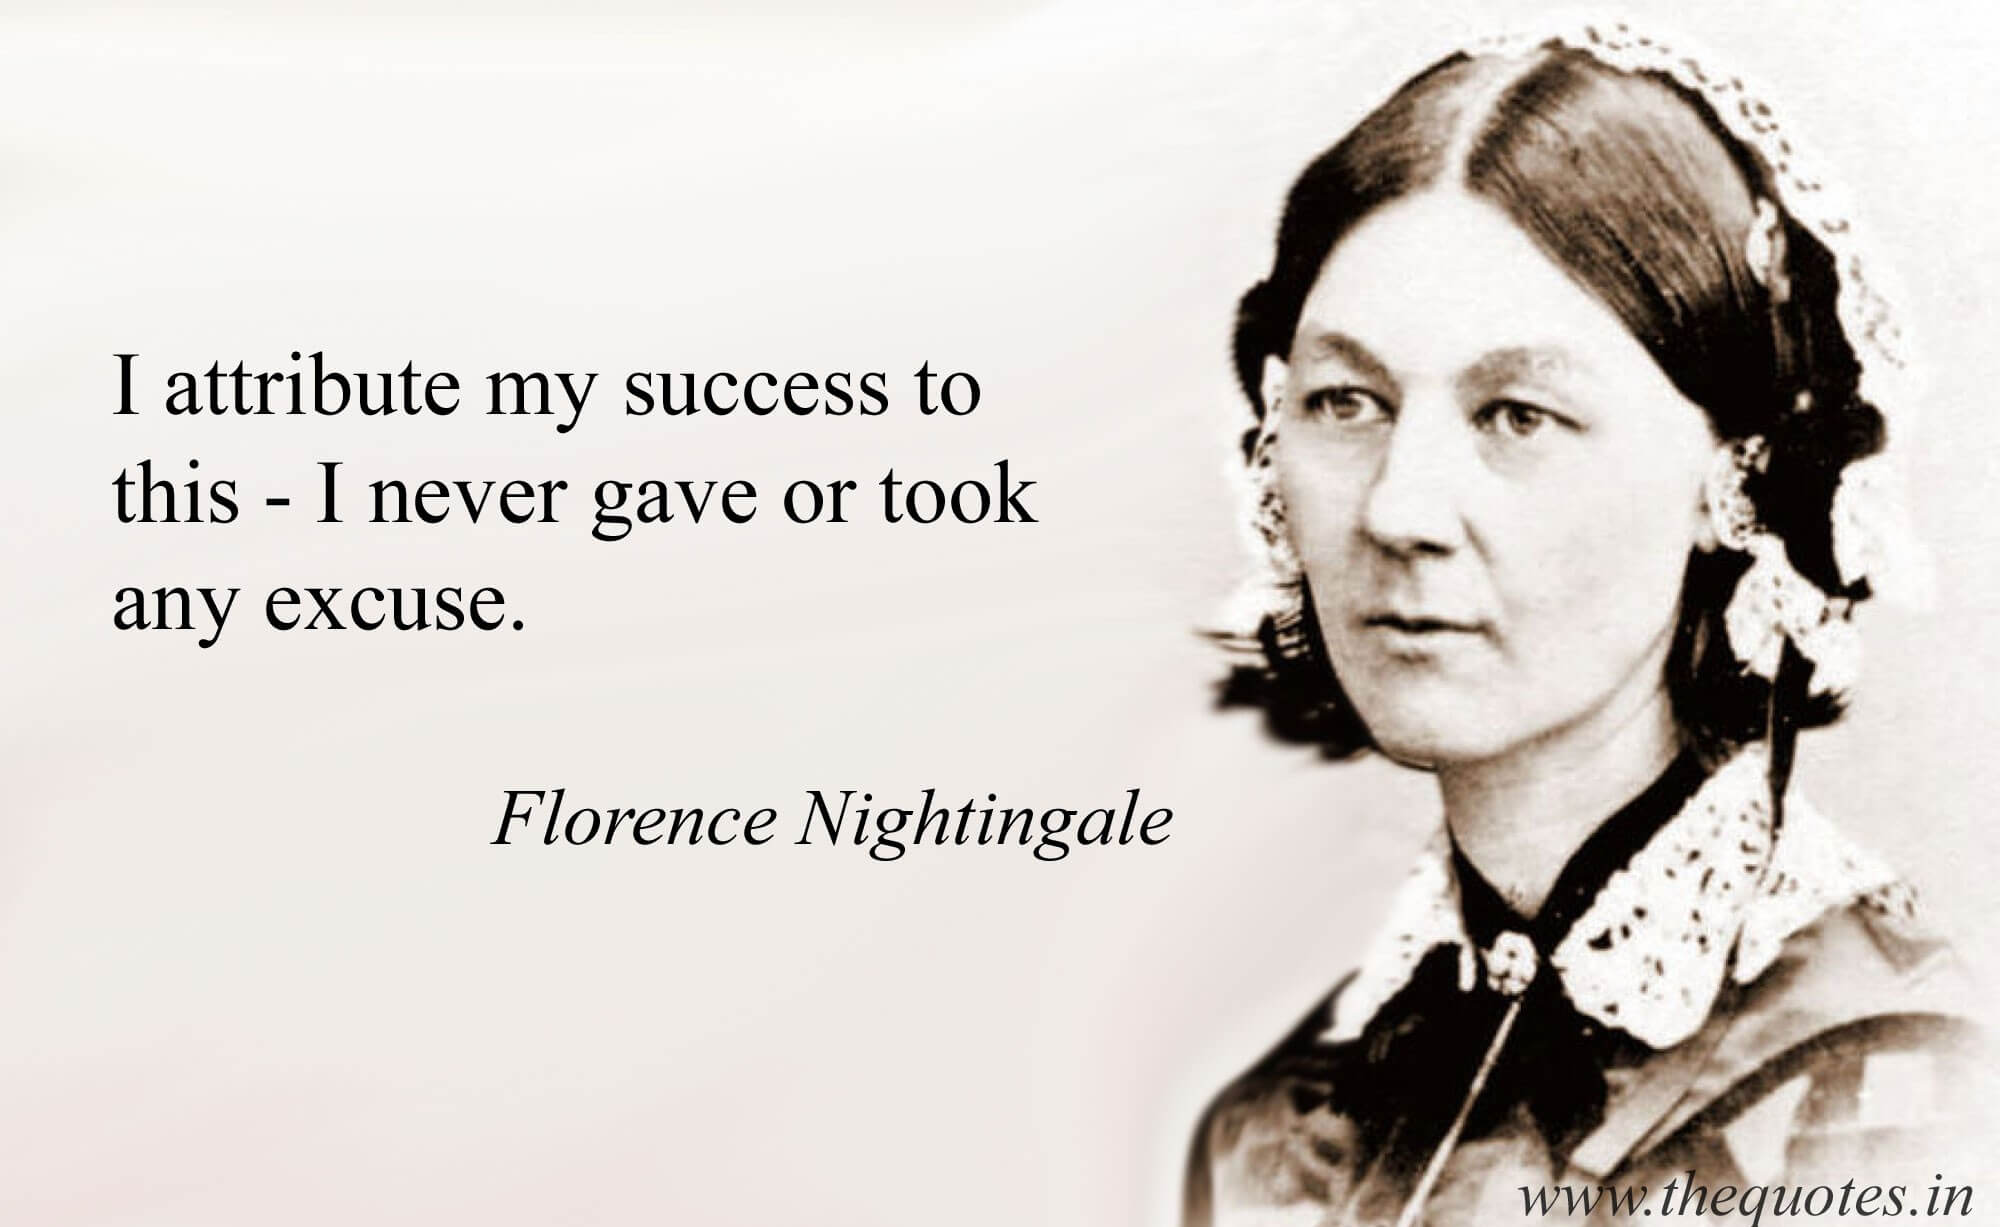 http://www.hdwallpapersfreedownload.com/uploads/large/special-days/florence-nightingale-quotes-nurses-day-wallpaper.jpg